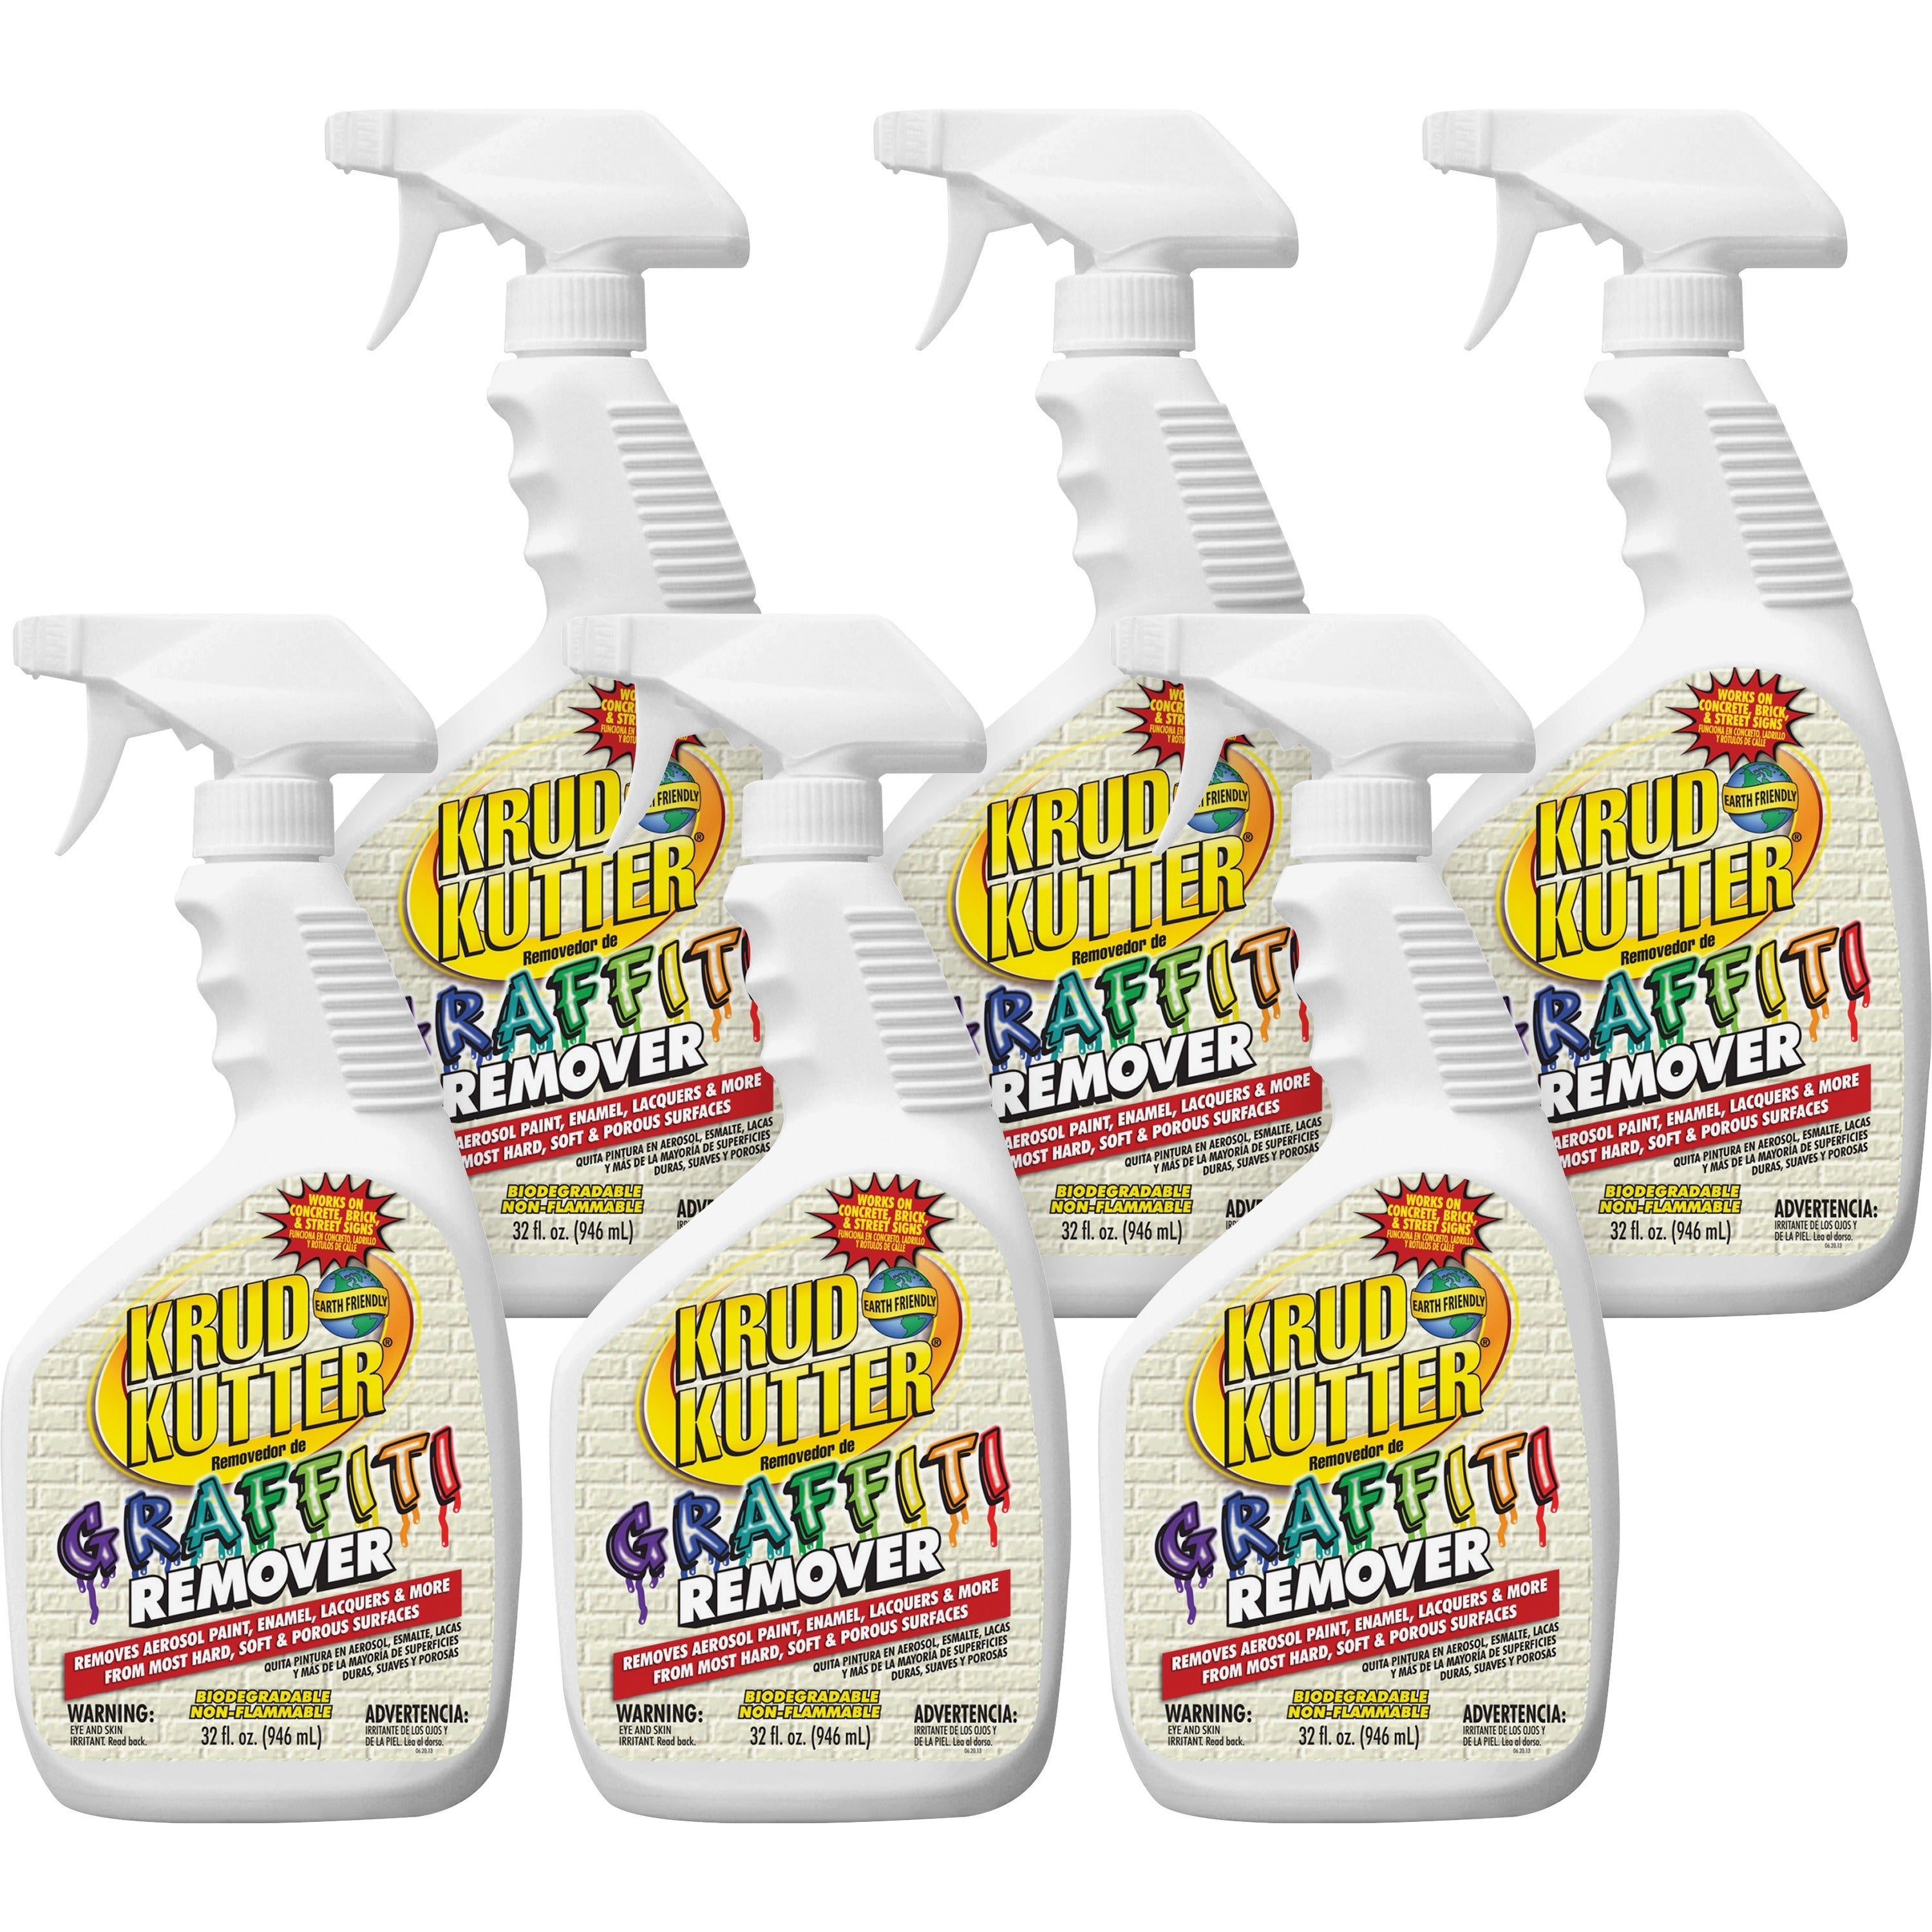 krud-kutter-graffiti-remover-ready-to-use-32-fl-oz-1-quart-6-carton-water-based-non-flammable-clear_rstgr326ct - 1